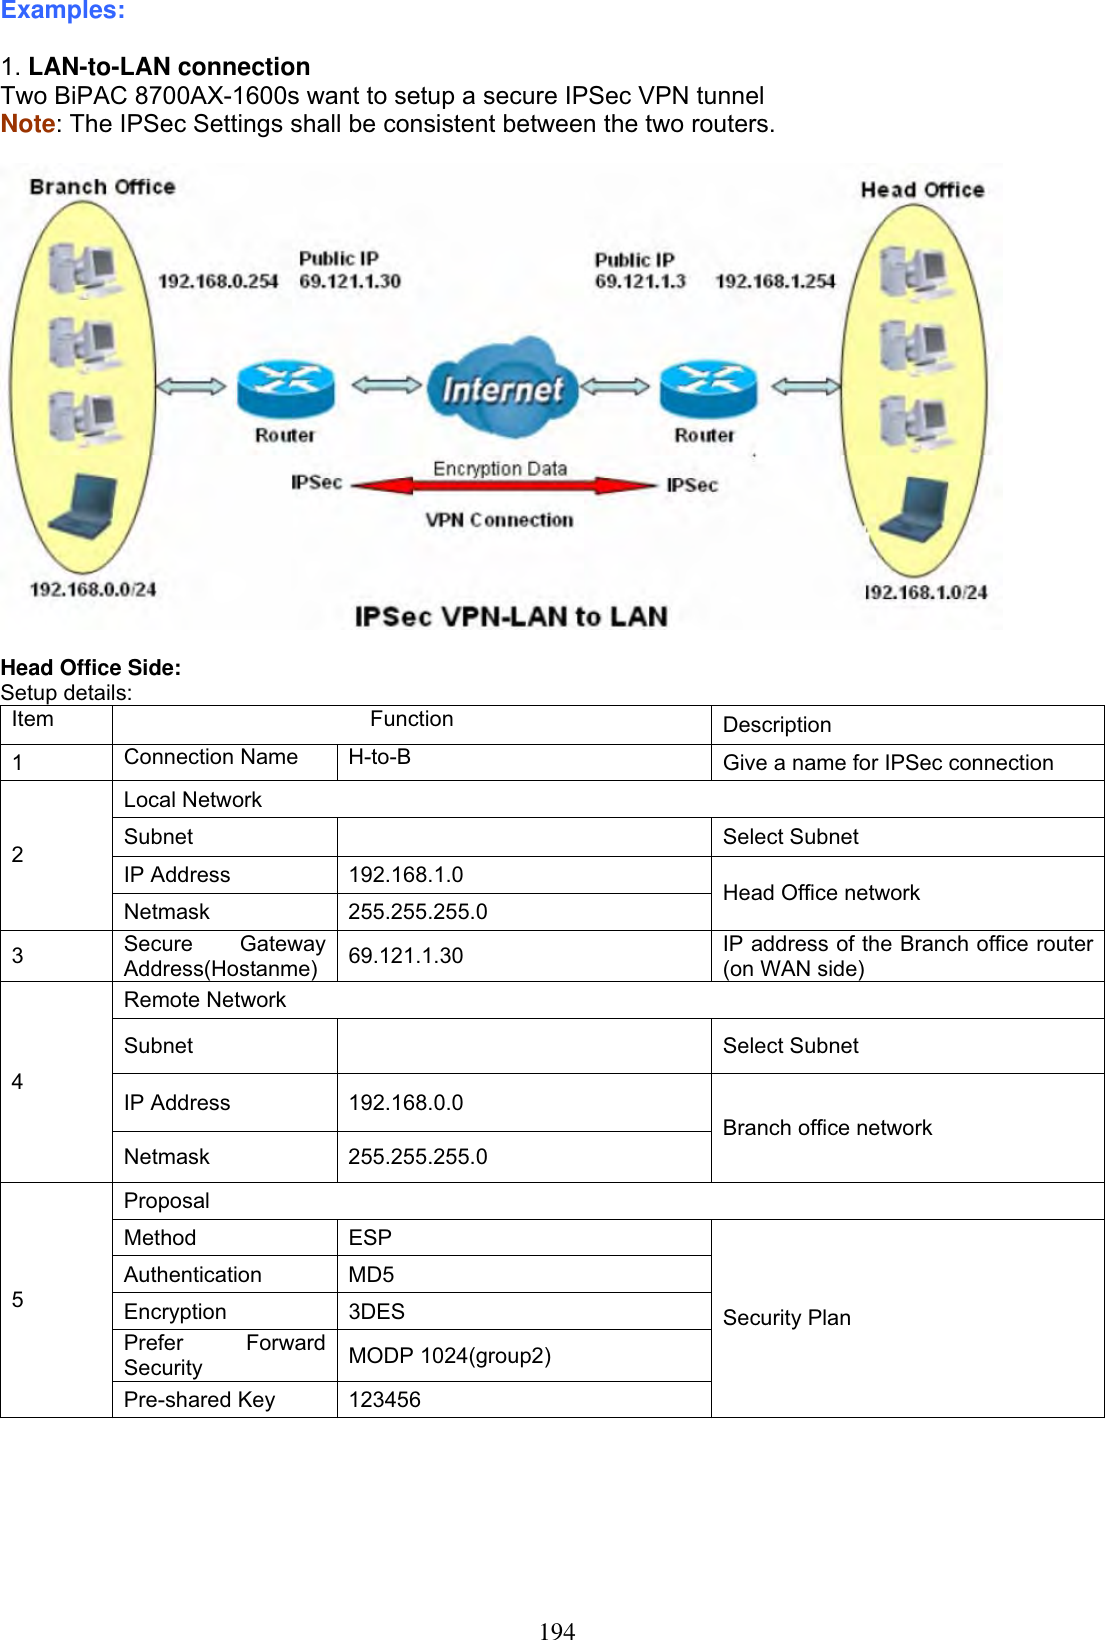 194Examples:1. LAN-to-LAN connection Two BiPAC 8700AX-1600s want to setup a secure IPSec VPN tunnelNote: The IPSec Settings shall be consistent between the two routers. Head Office Side: Setup details: Item Function Description 1Connection Name  H-to-B  Give a name for IPSec connection Local Network Subnet Select SubnetIP Address  192.168.1.0 2Netmask 255.255.255.0  Head Office network 3Secure Gateway Address(Hostanme)  69.121.1.30  IP address of the Branch office router (on WAN side) Remote Network Subnet   Select Subnet IP Address  192.168.0.0 4Netmask 255.255.255.0 Branch office network ProposalMethod   ESP Authentication MD5 Encryption   3DES Prefer Forward Security   MODP 1024(group2) 5Pre-shared Key  123456 Security Plan 